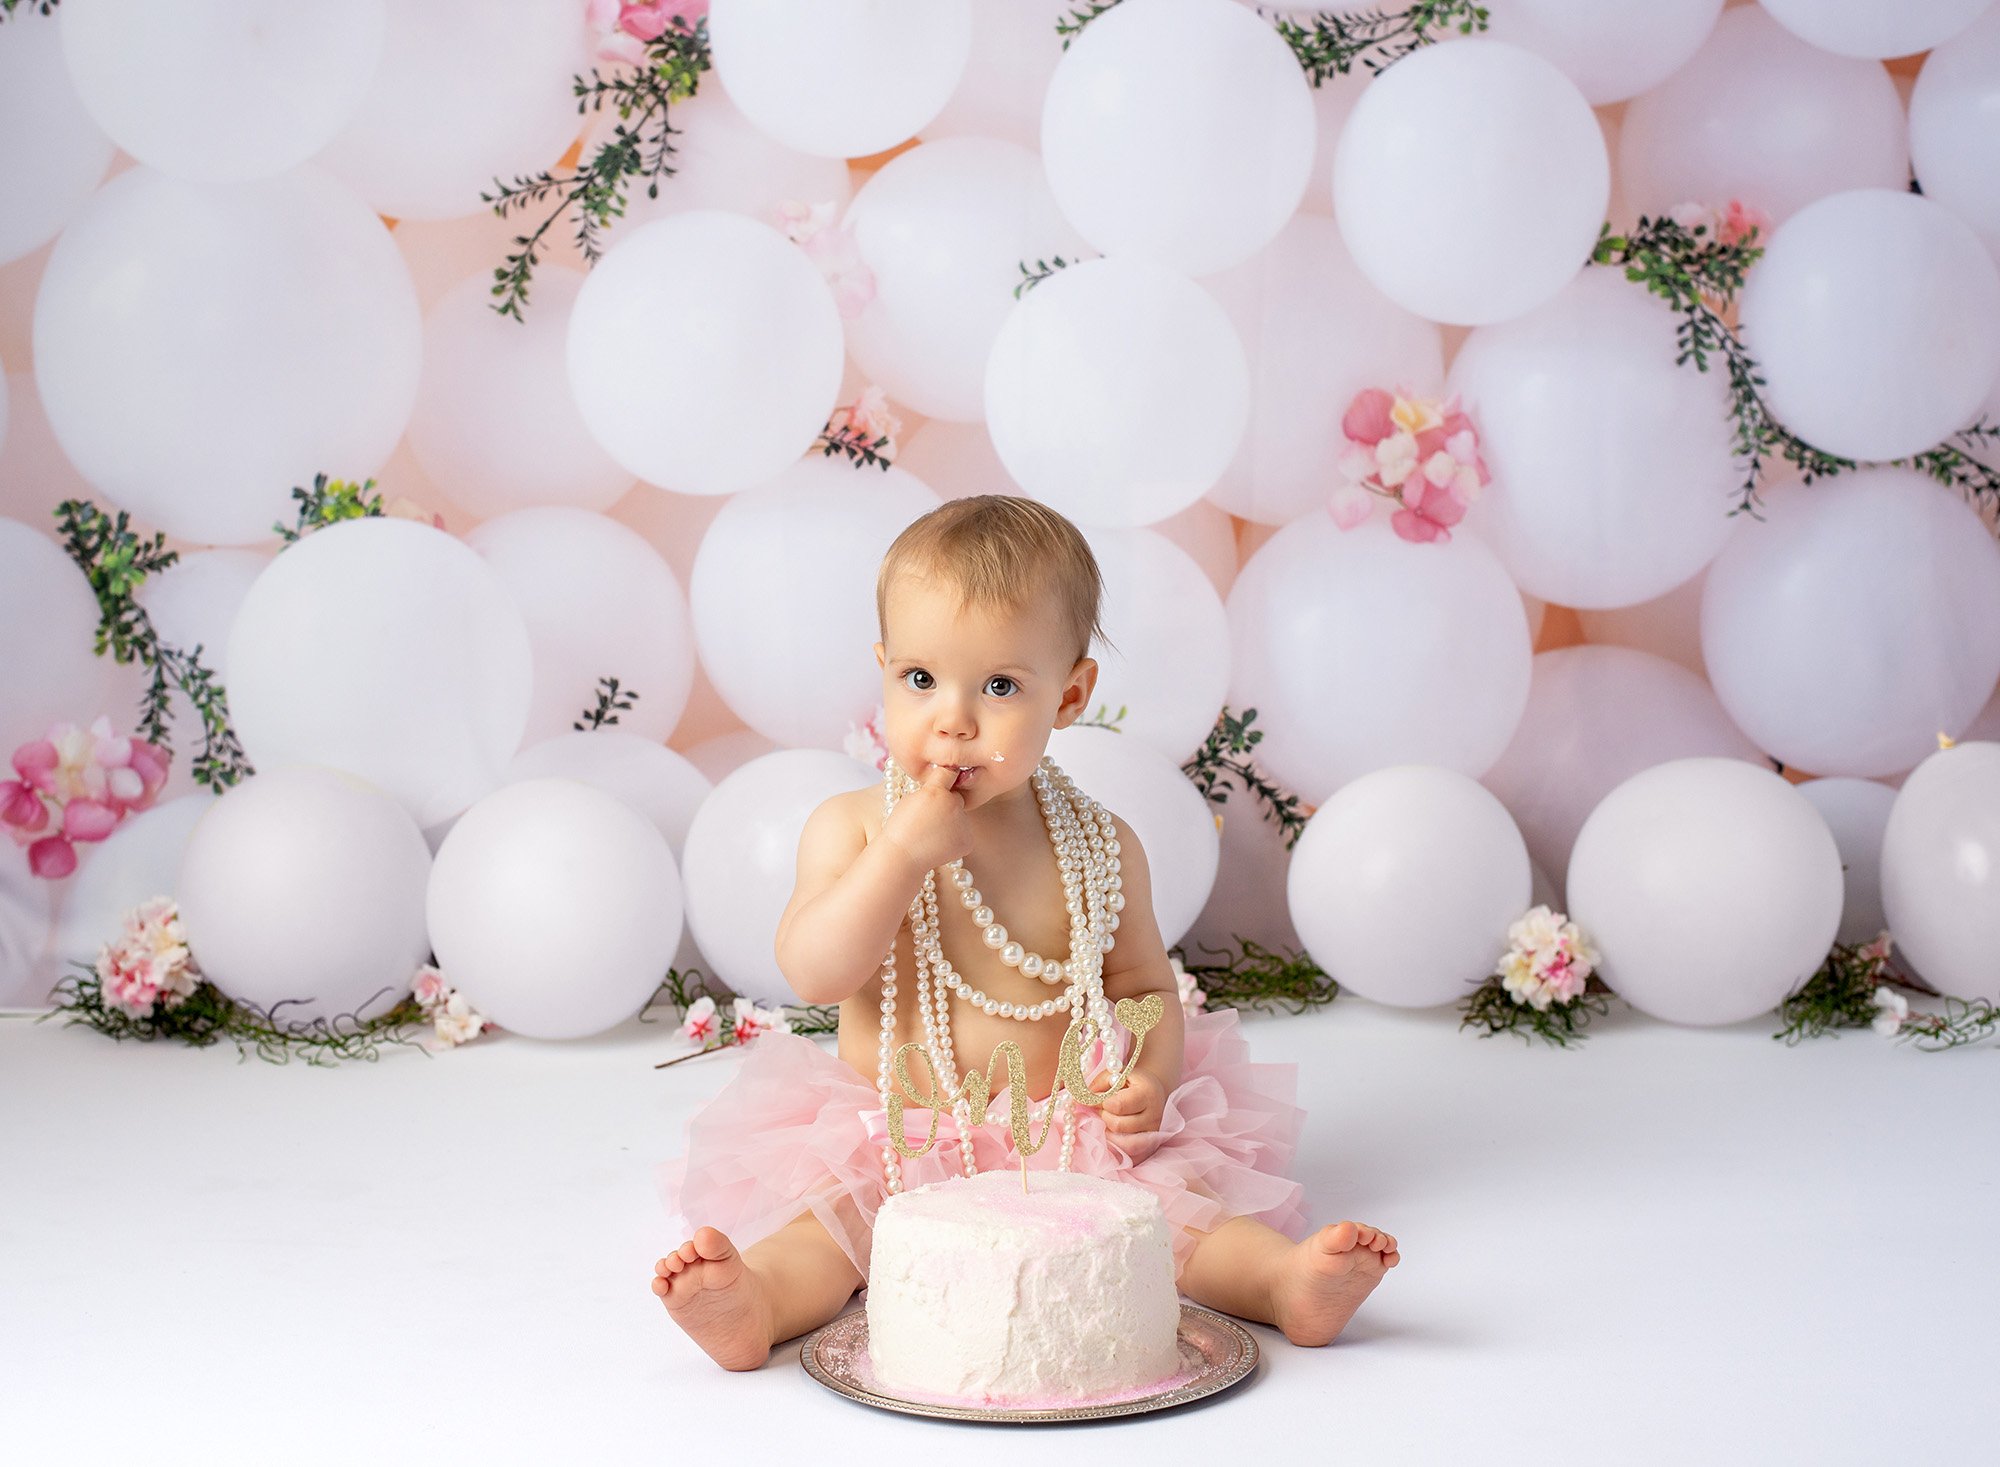 baby girl wearing layered pearl necklace and pink tutu sitting in front of cake with gold glitter ONE sign with white balloons in background putting finger in mouth